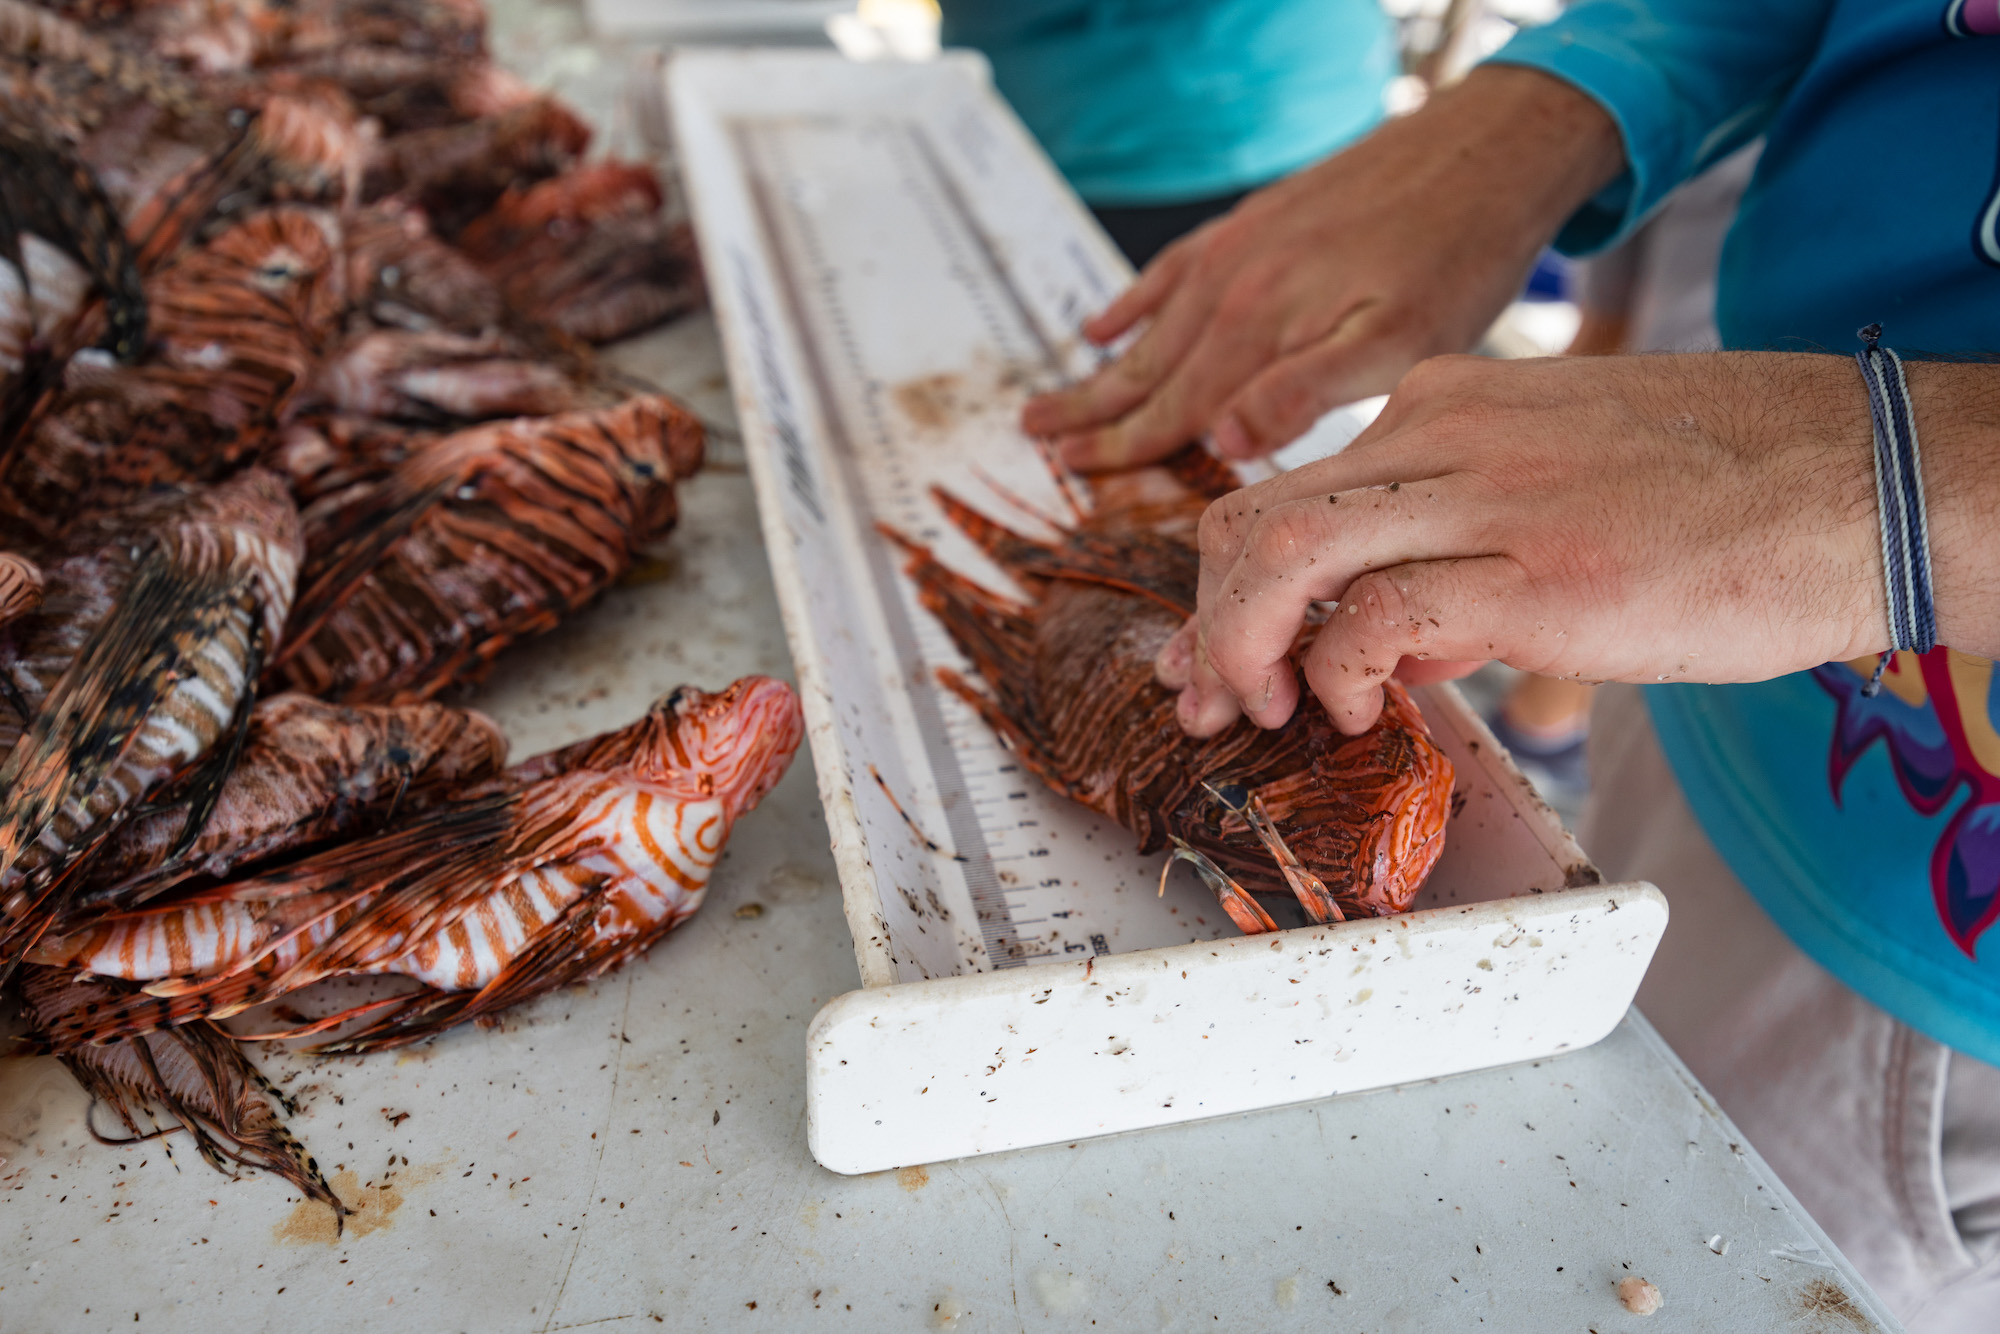 A woman measures the length of a lionfish.